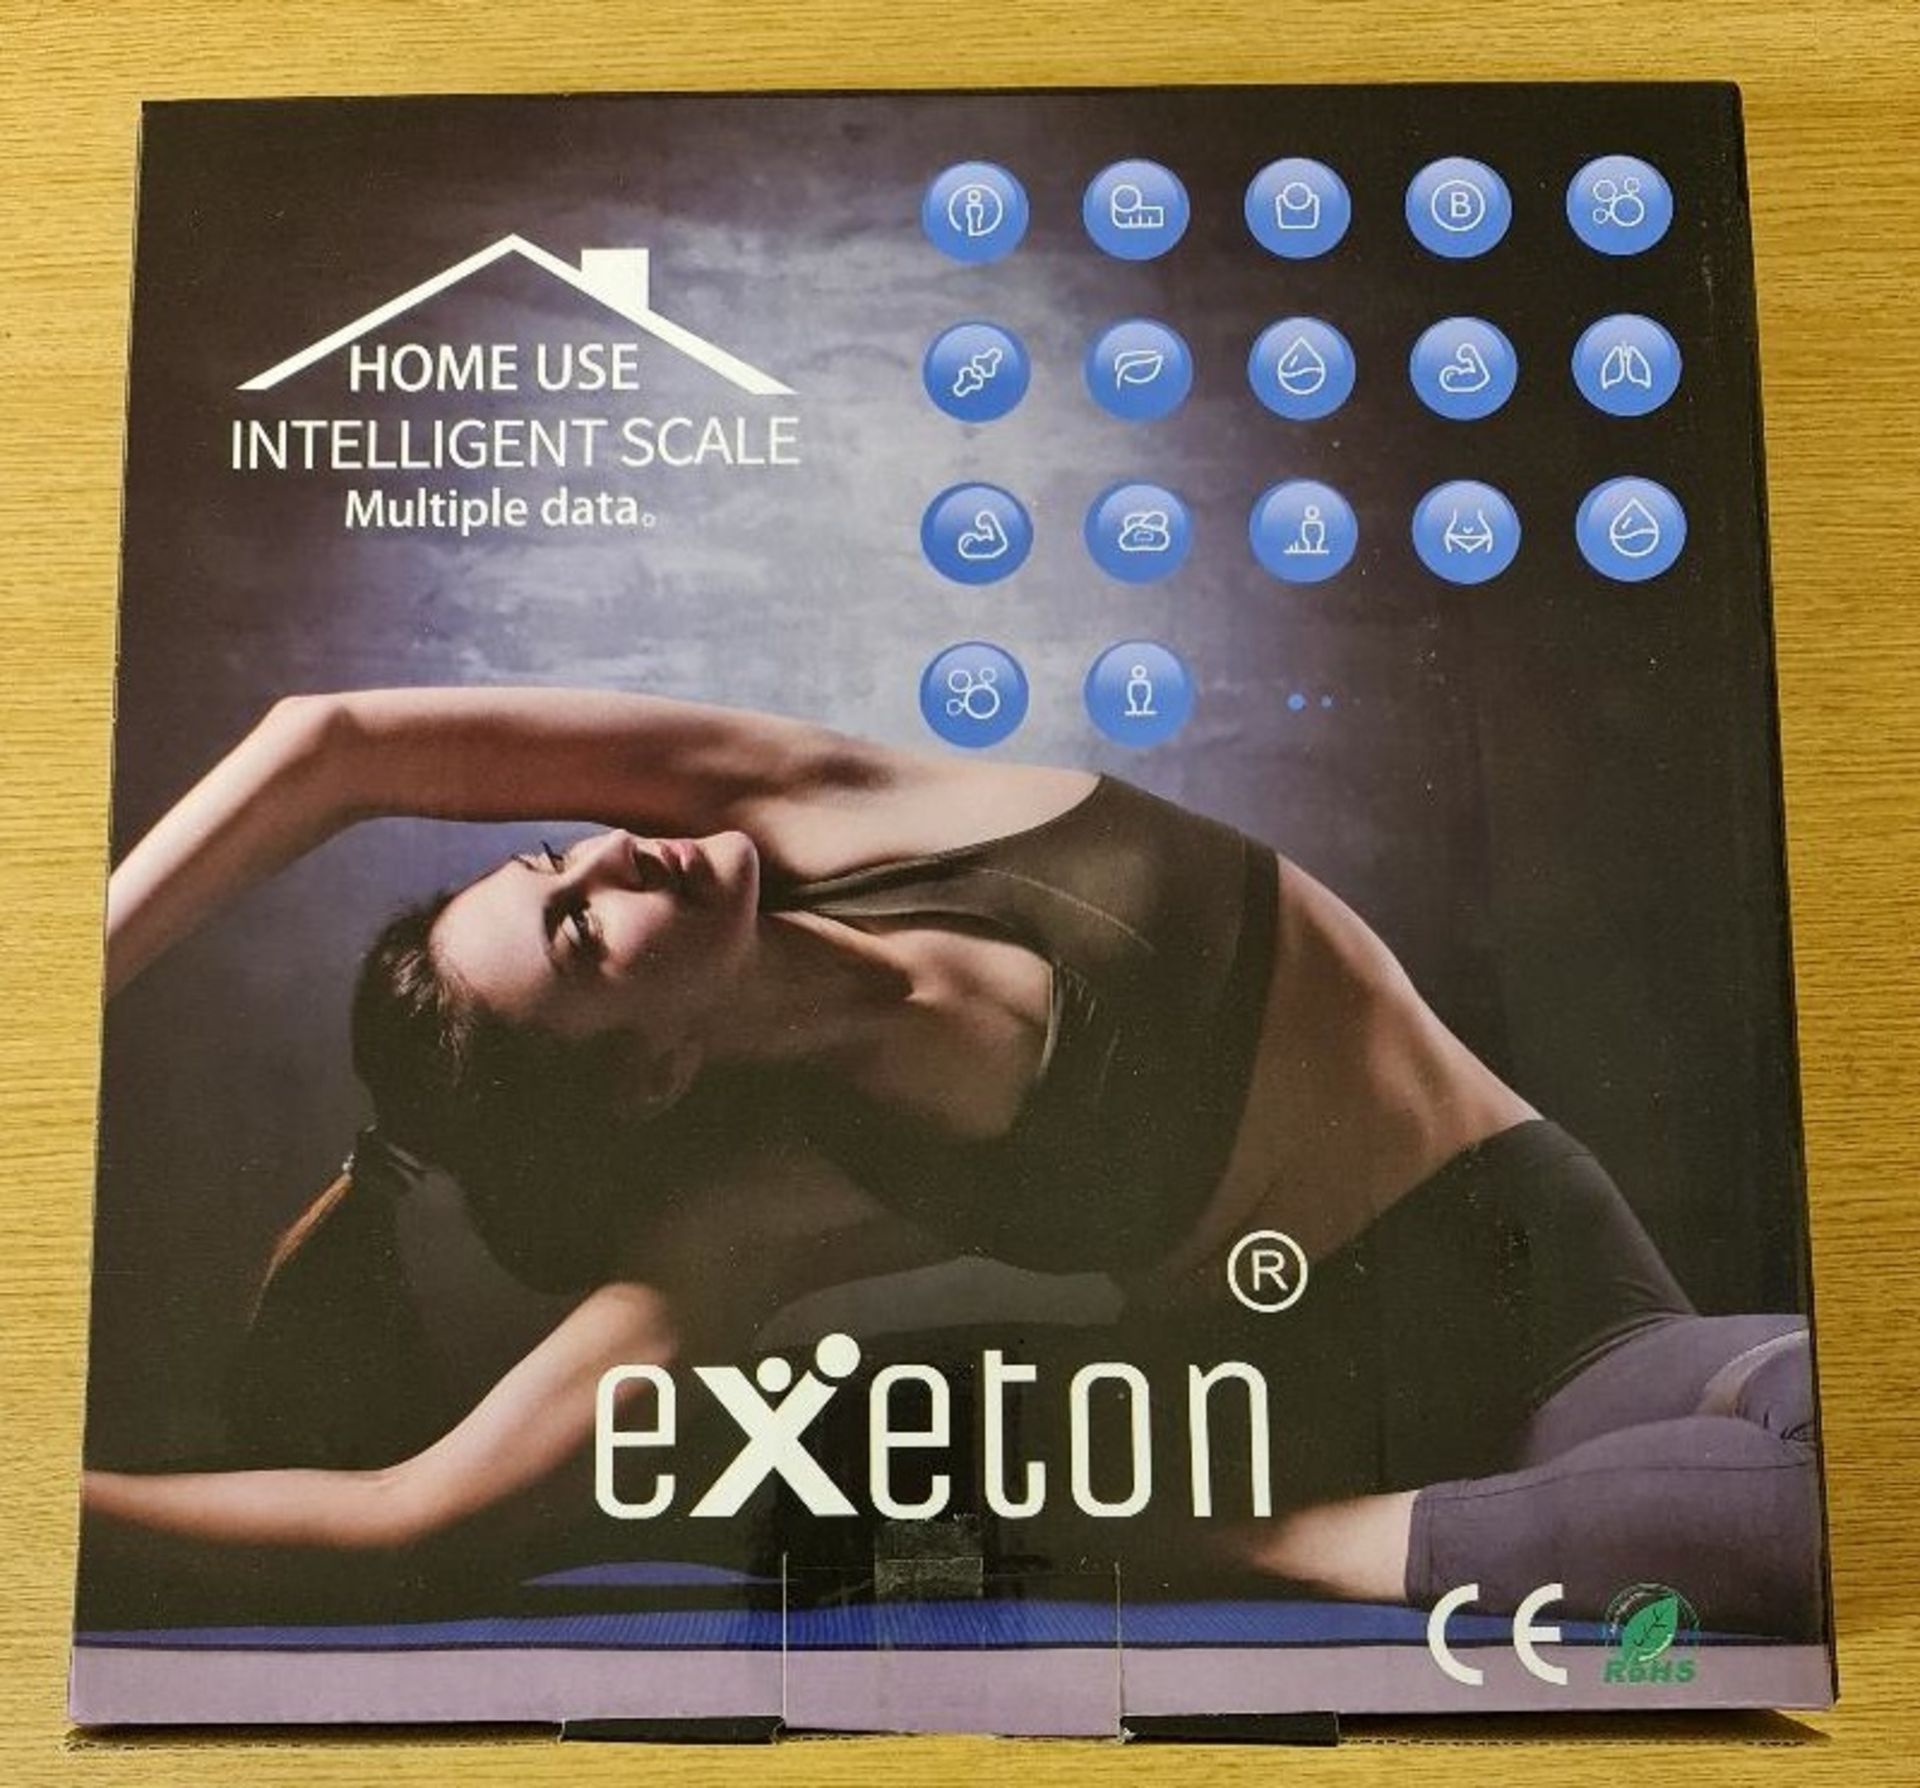 Exeton, Body Weighing Scale, Bluetooth Smart, Body Fat, BMI, 180Kg/396Lbs, USB Rechargeable - Image 2 of 3